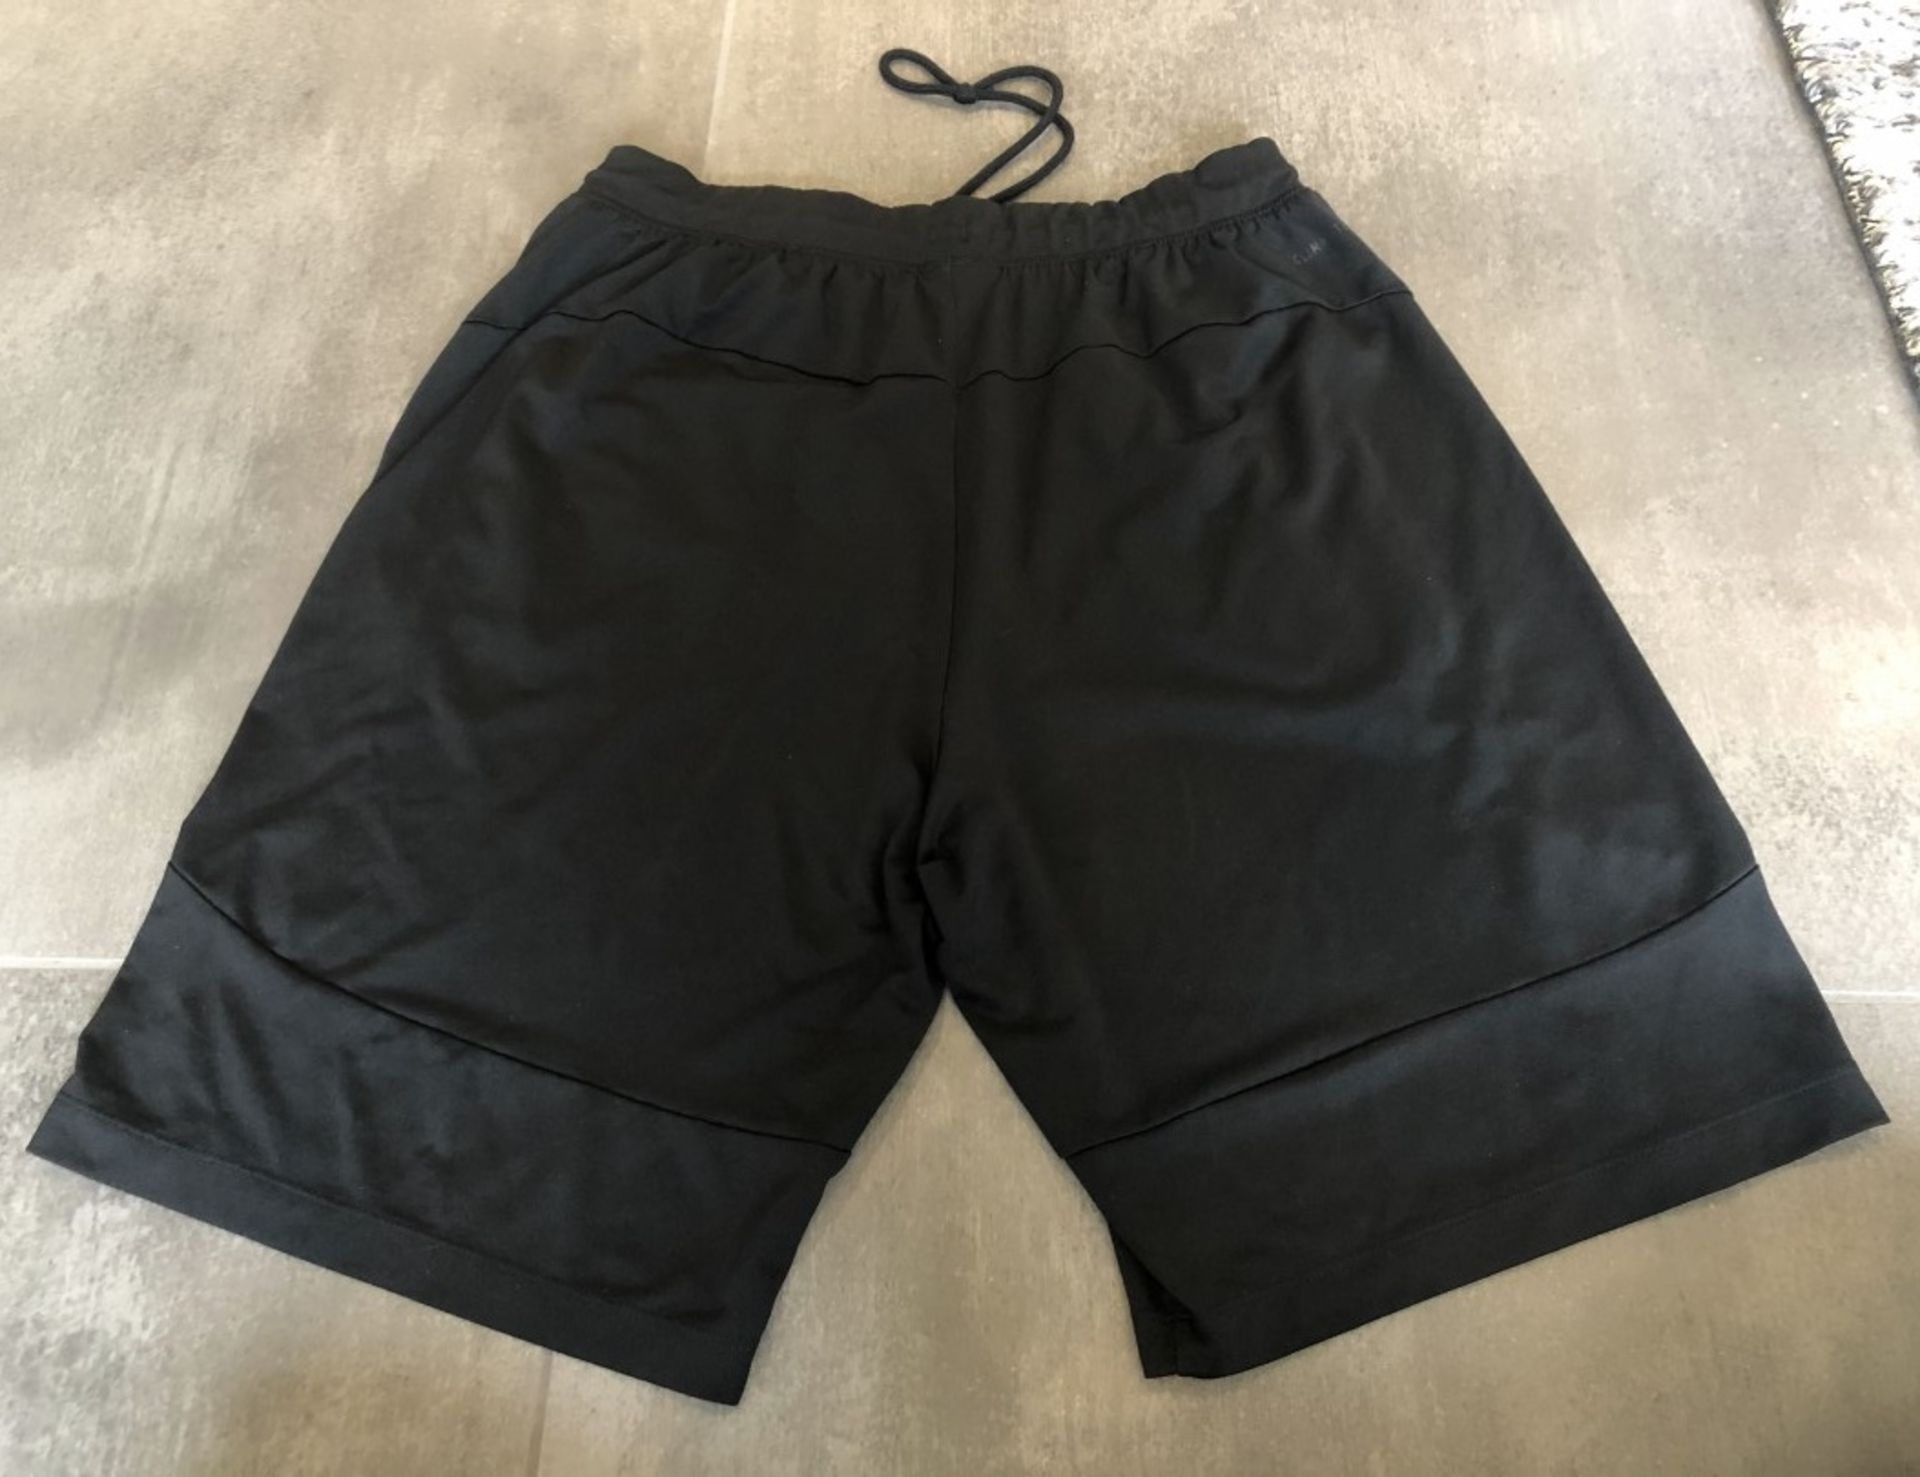 4 x Assorted Pairs Of Men's Genuine Adidas Shorts - AllIn Black - Sizes: L-XL - Preowned - Image 9 of 23